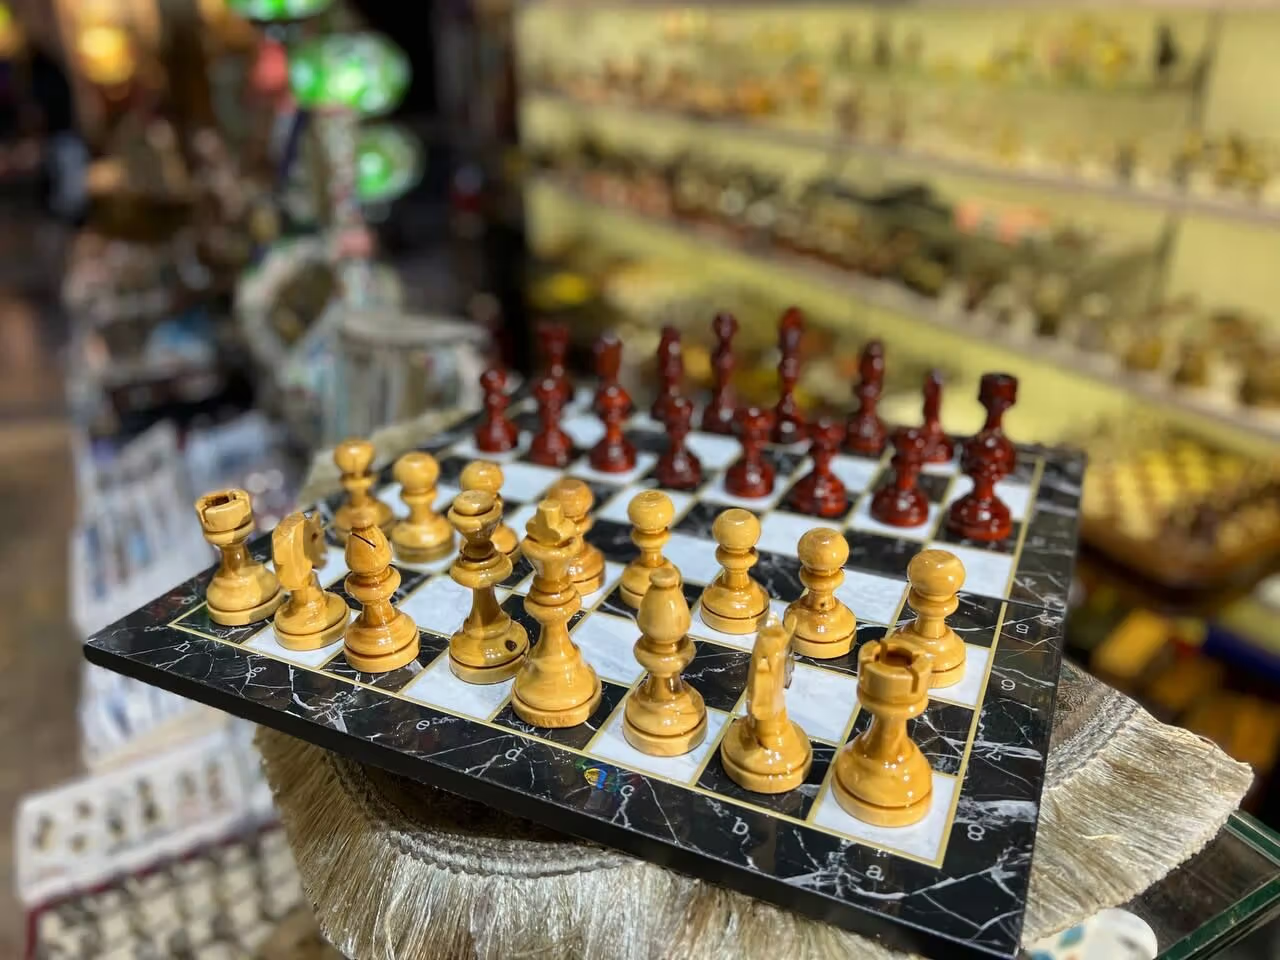 Chess Board Set from the Holy Land - The Jerusalem Gift Shop